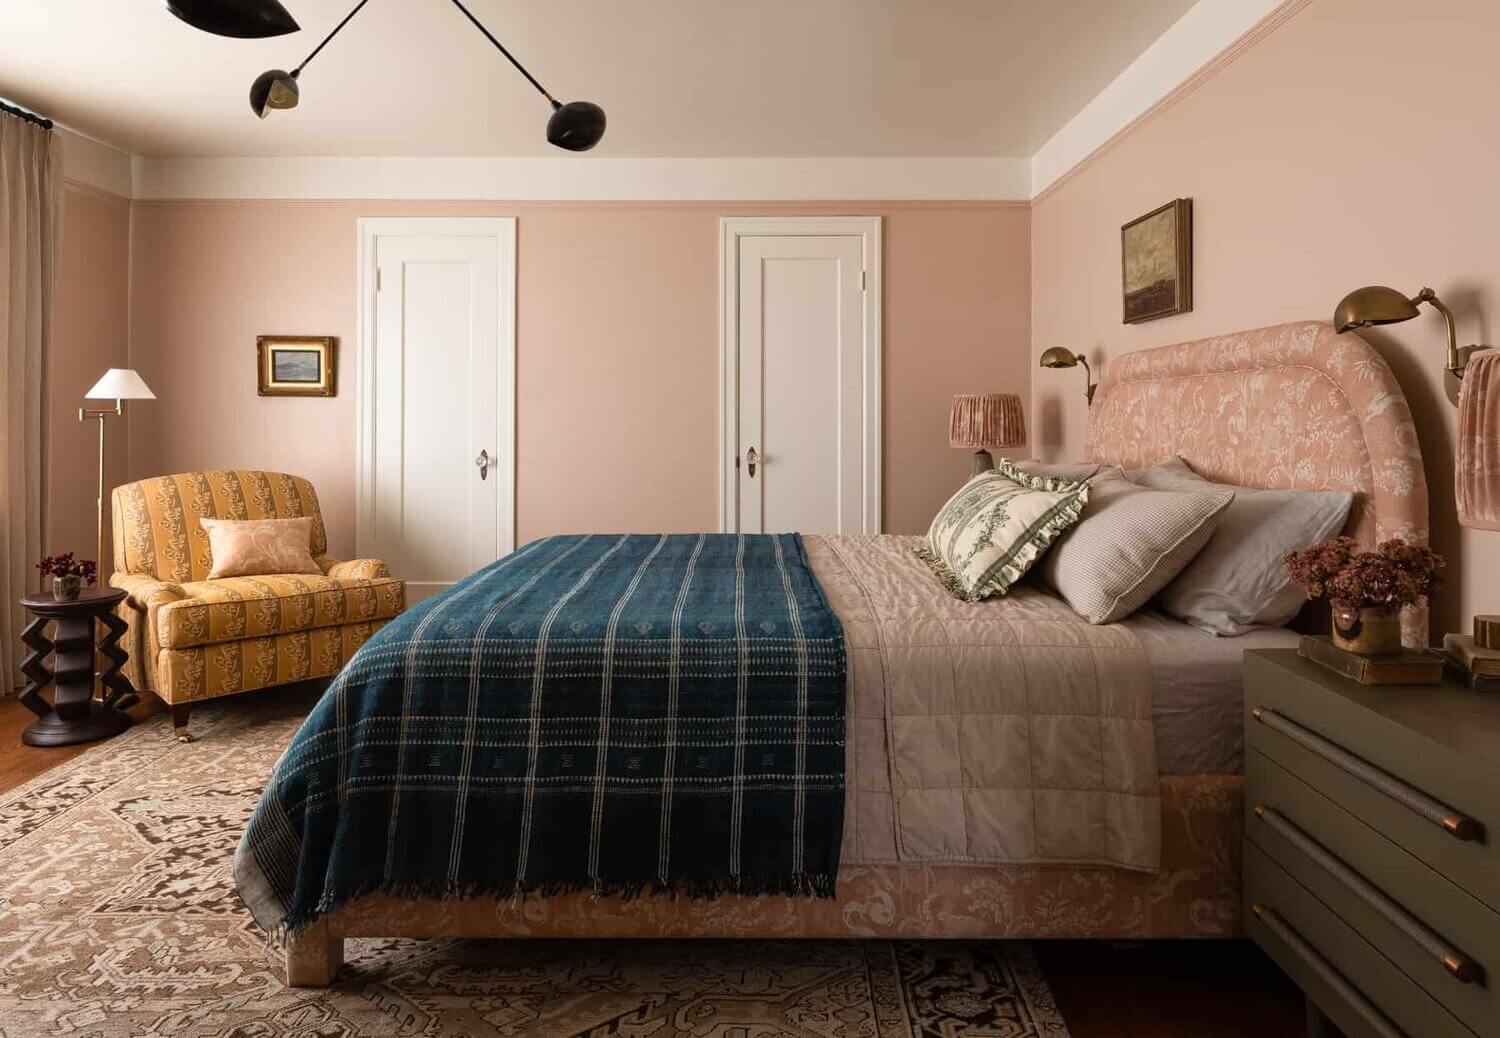 BlushpinkbedroomindesignerHeidiCailliersWashingtonhome TheNordroom Soothing Colors in Designer Heidi Caillier's Eclectic Washington Home